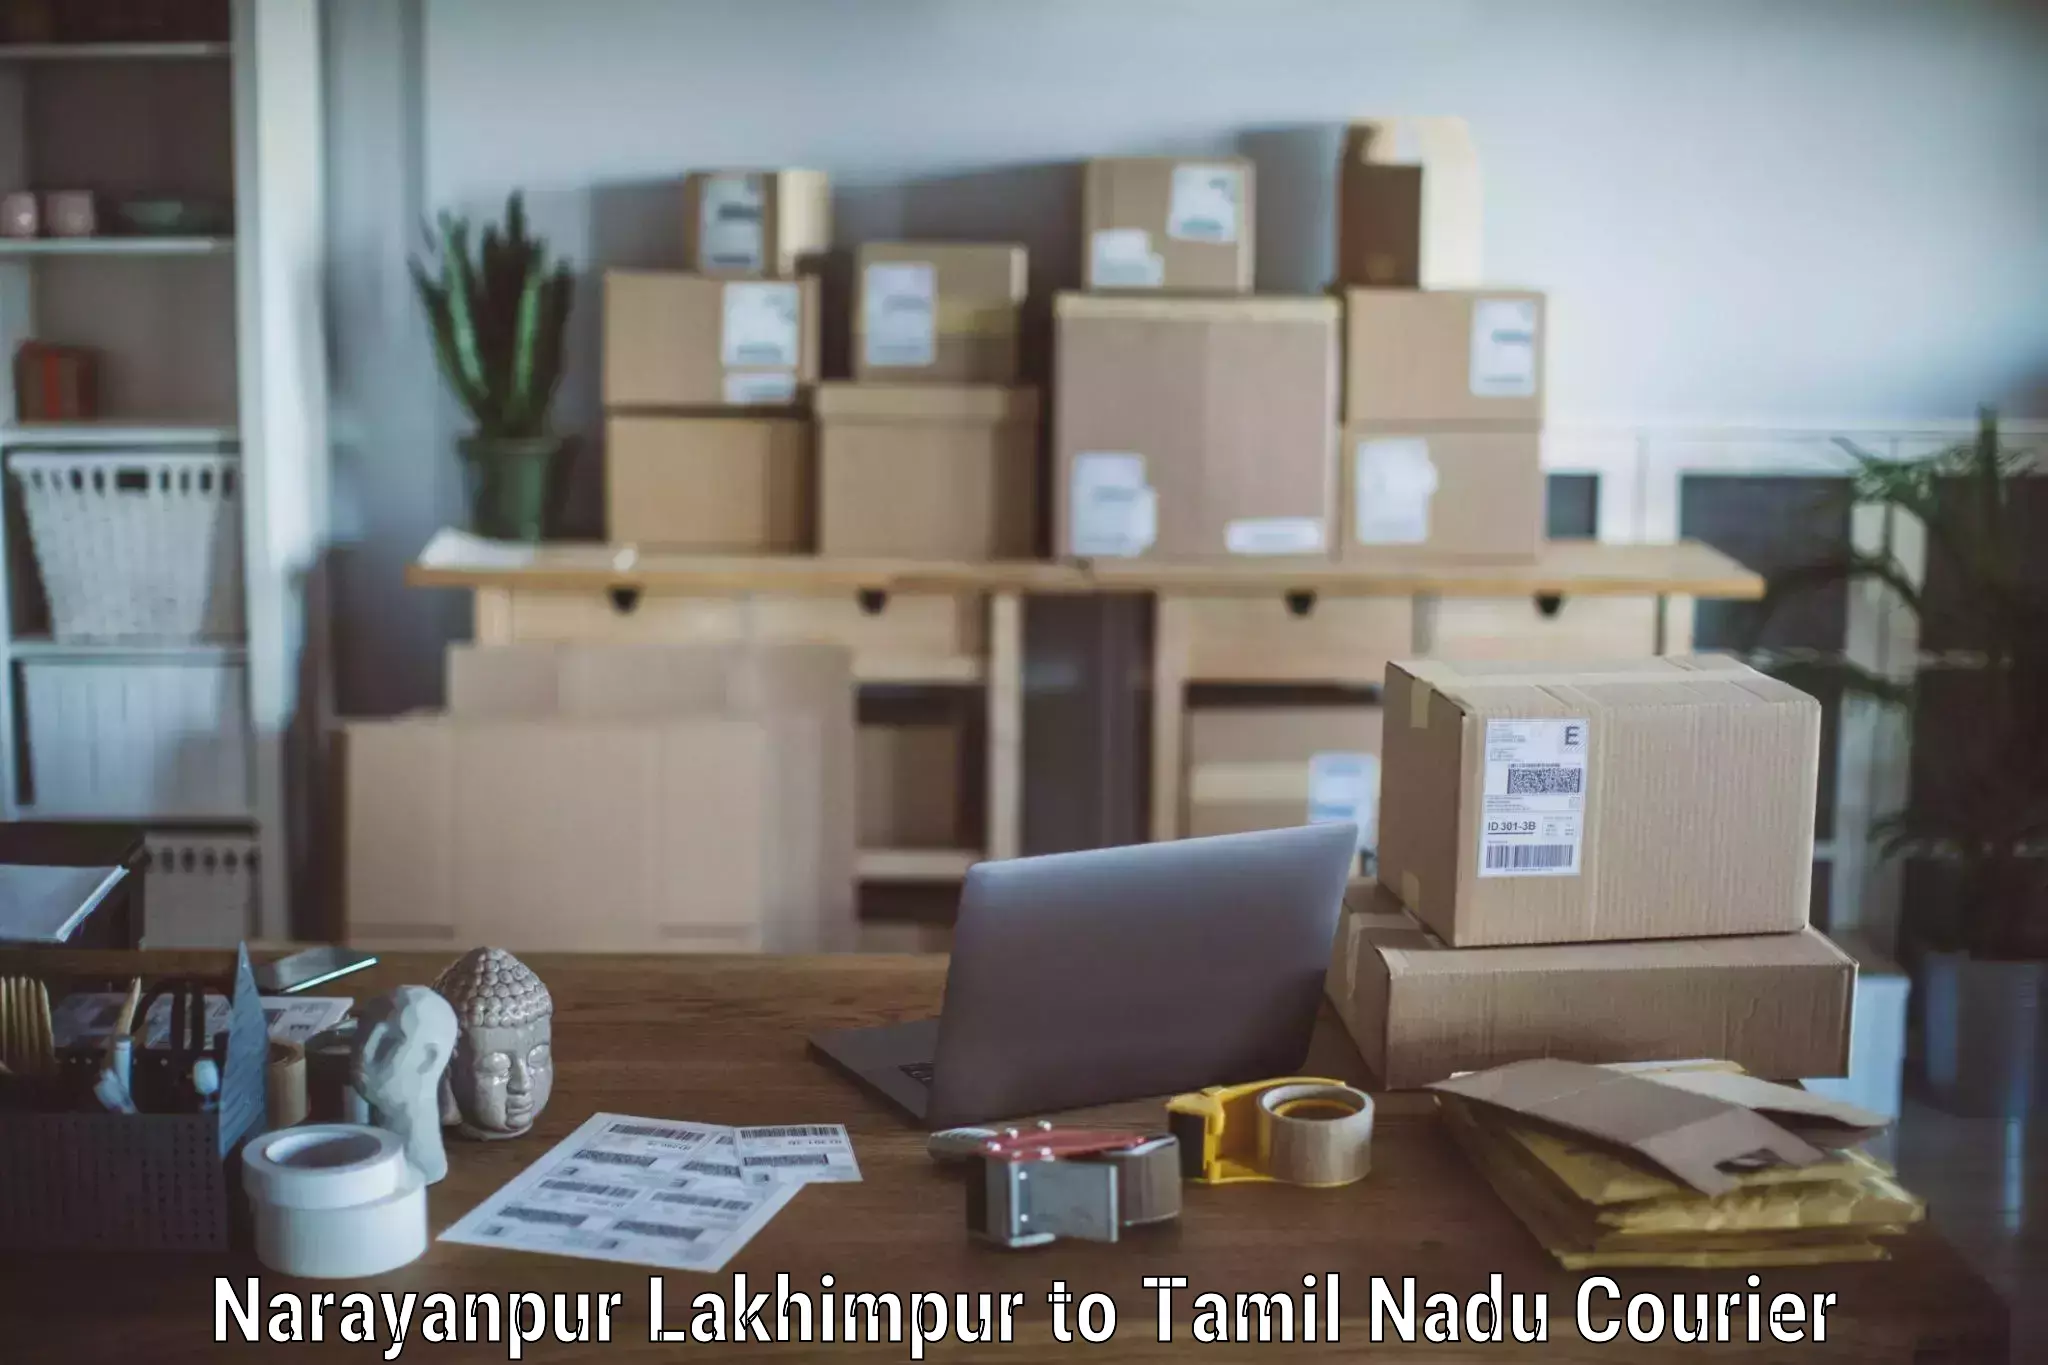 Professional packing services Narayanpur Lakhimpur to Bharath Institute of Higher Education and Research Chennai